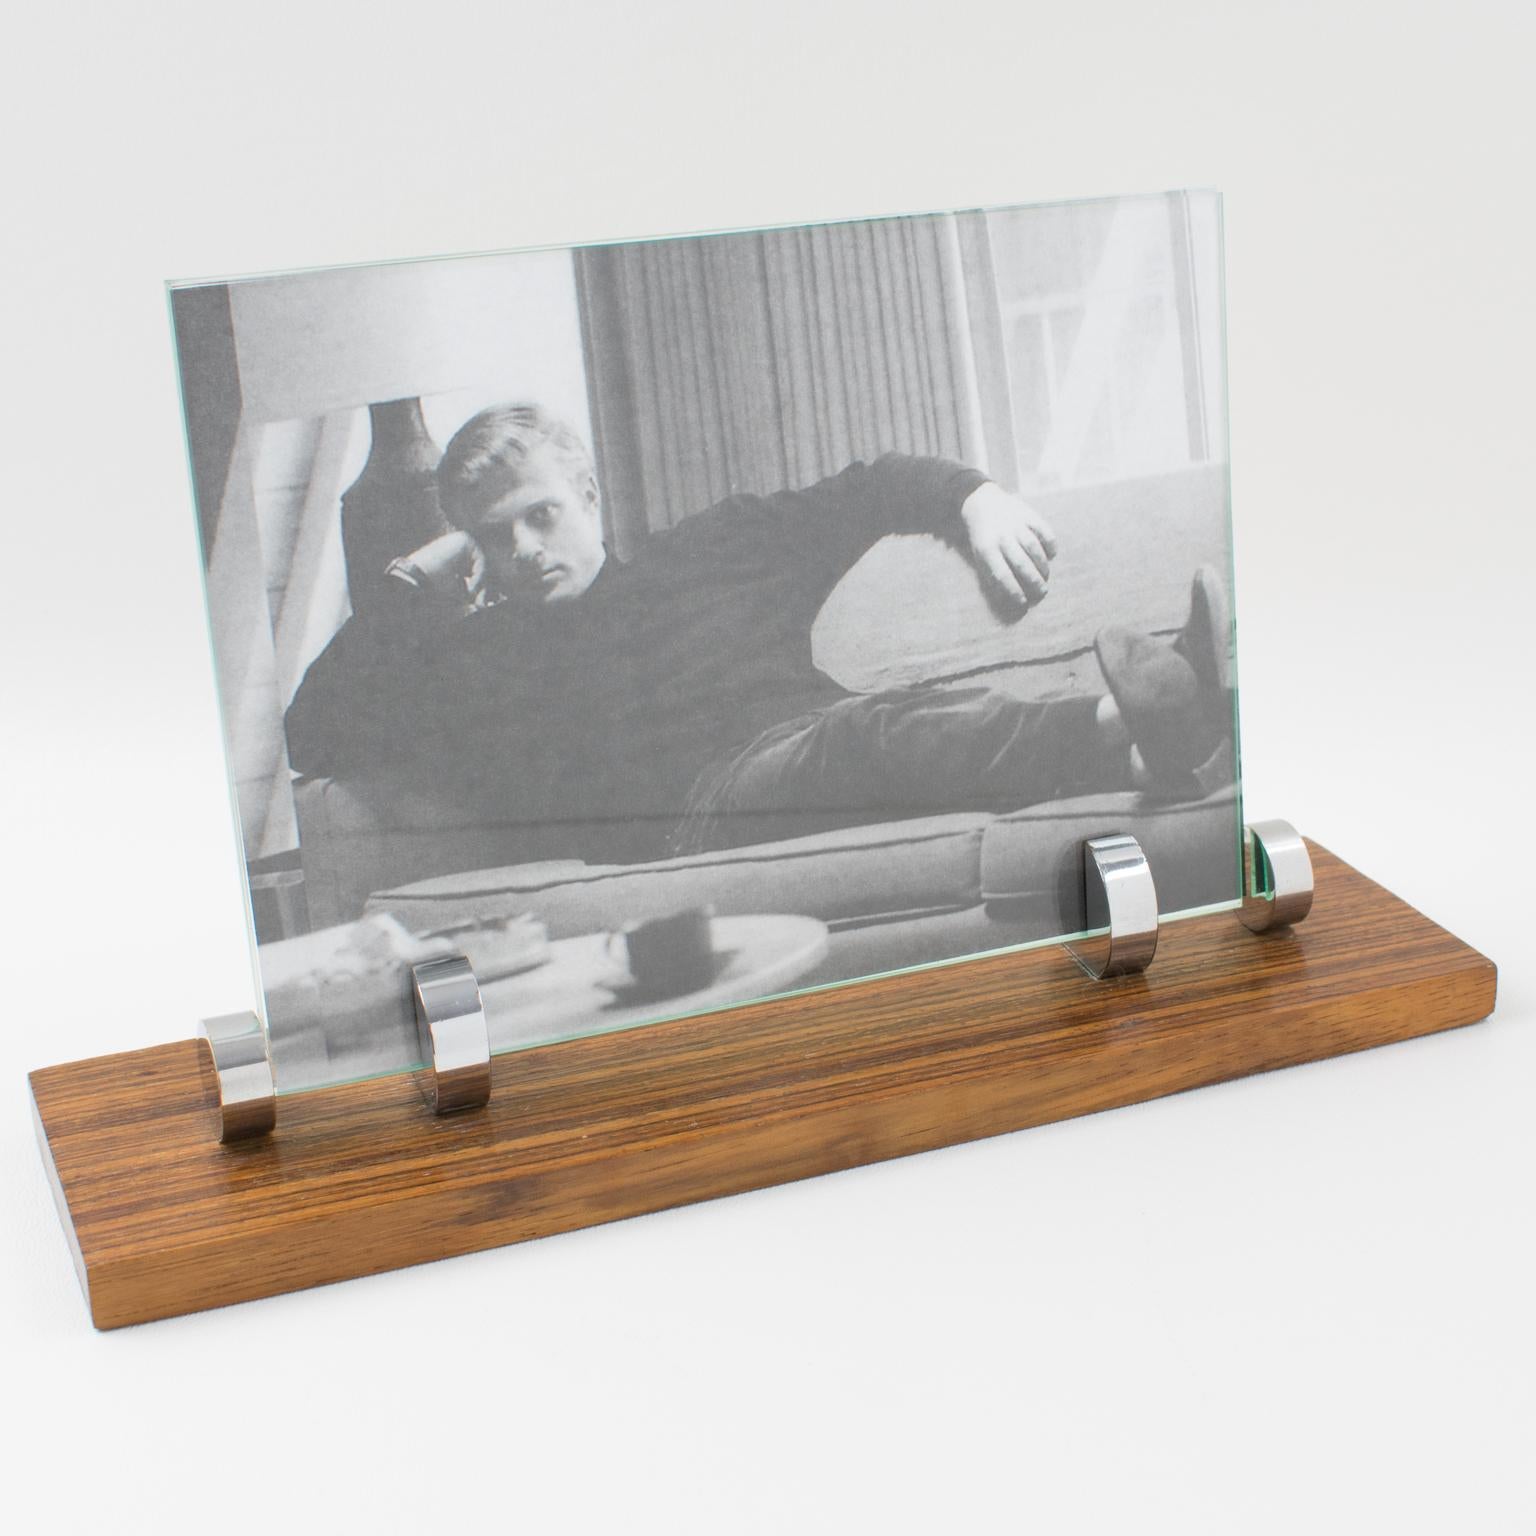 Lovely French Art Deco picture photo frame, featuring thick hand-rubbed Zebra wood (Zebrano) plinth compliment with polished chrome metal holders and accents. The frame is complete with its two glass sheets to enclose the photograph. Picture can be